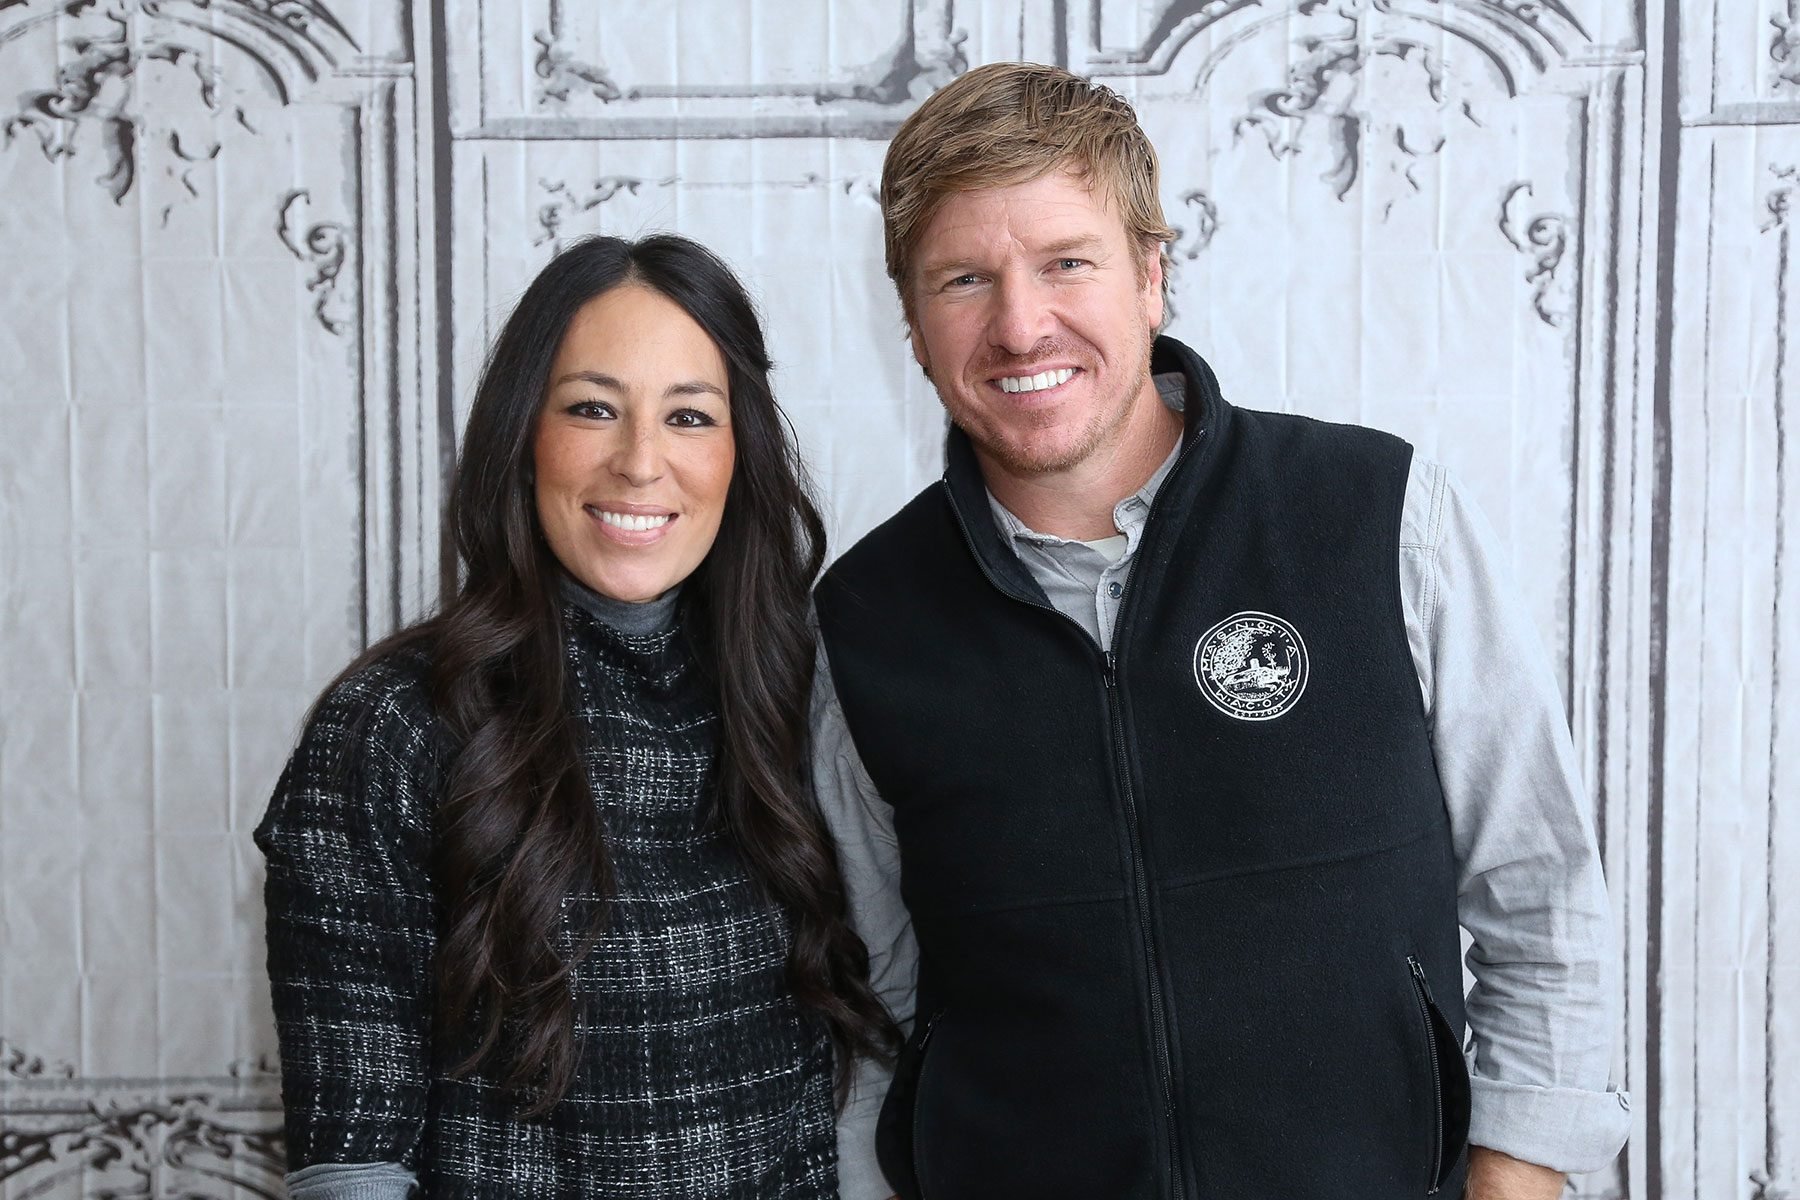 Joanna Gaines' Castle Bathroom and Laundry Room Makeover Is Insanely Gorgeous